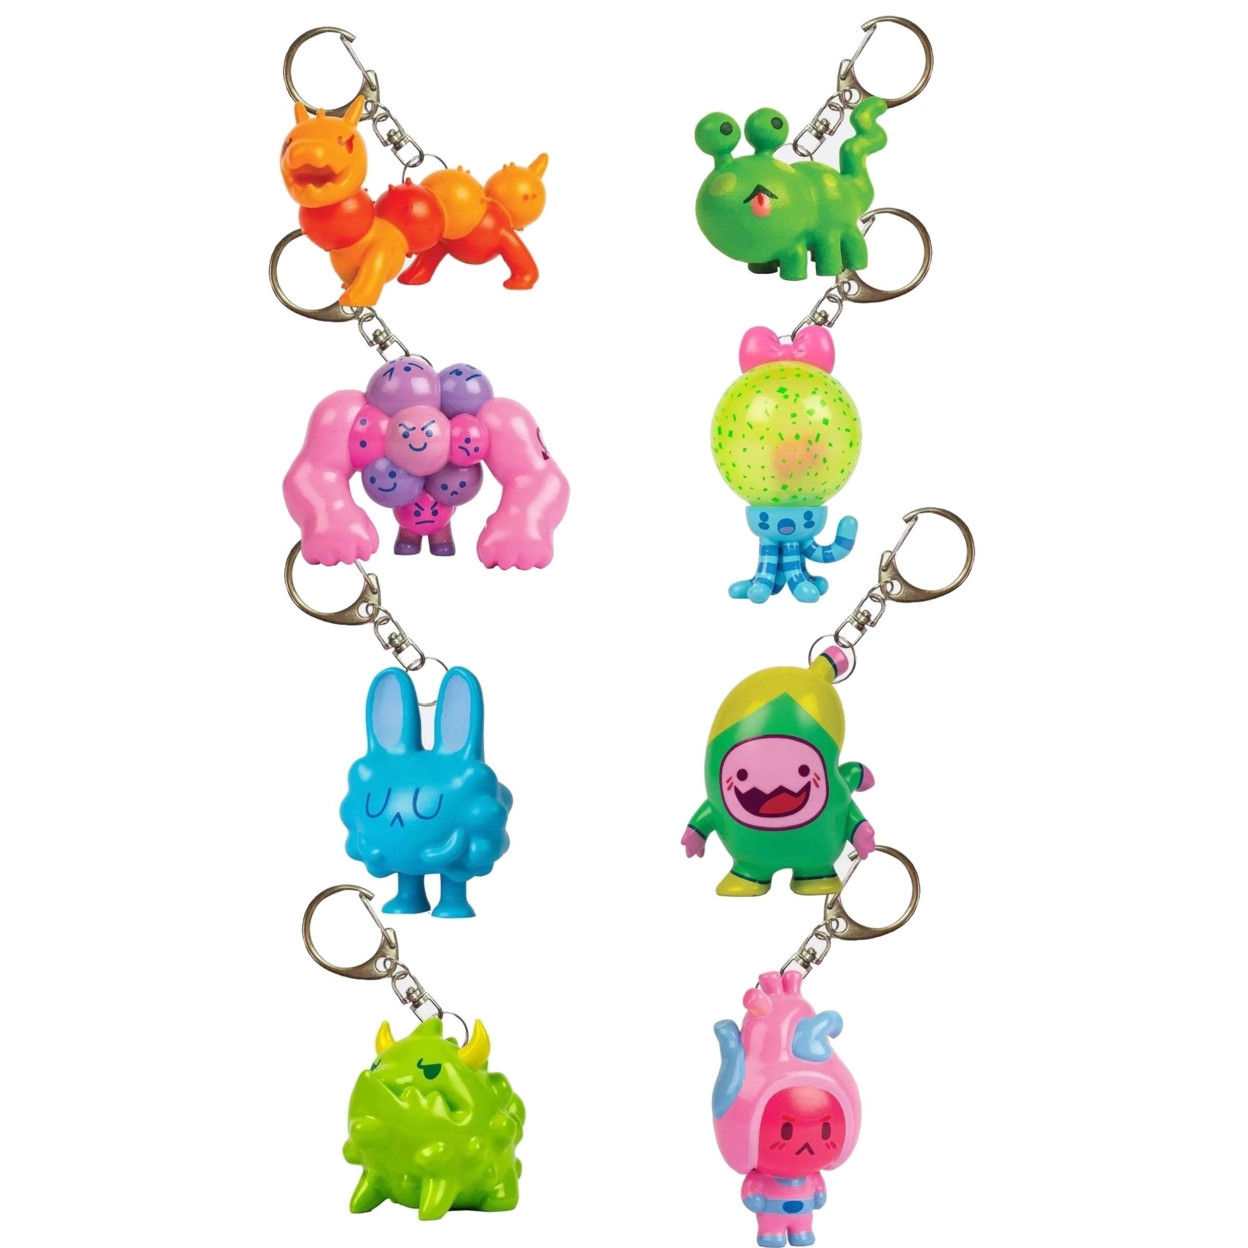 Organauts Tinies Keychain & Figure Bundle 6pc Space Bio-Heroes Organ Learning Toy Know Yourself